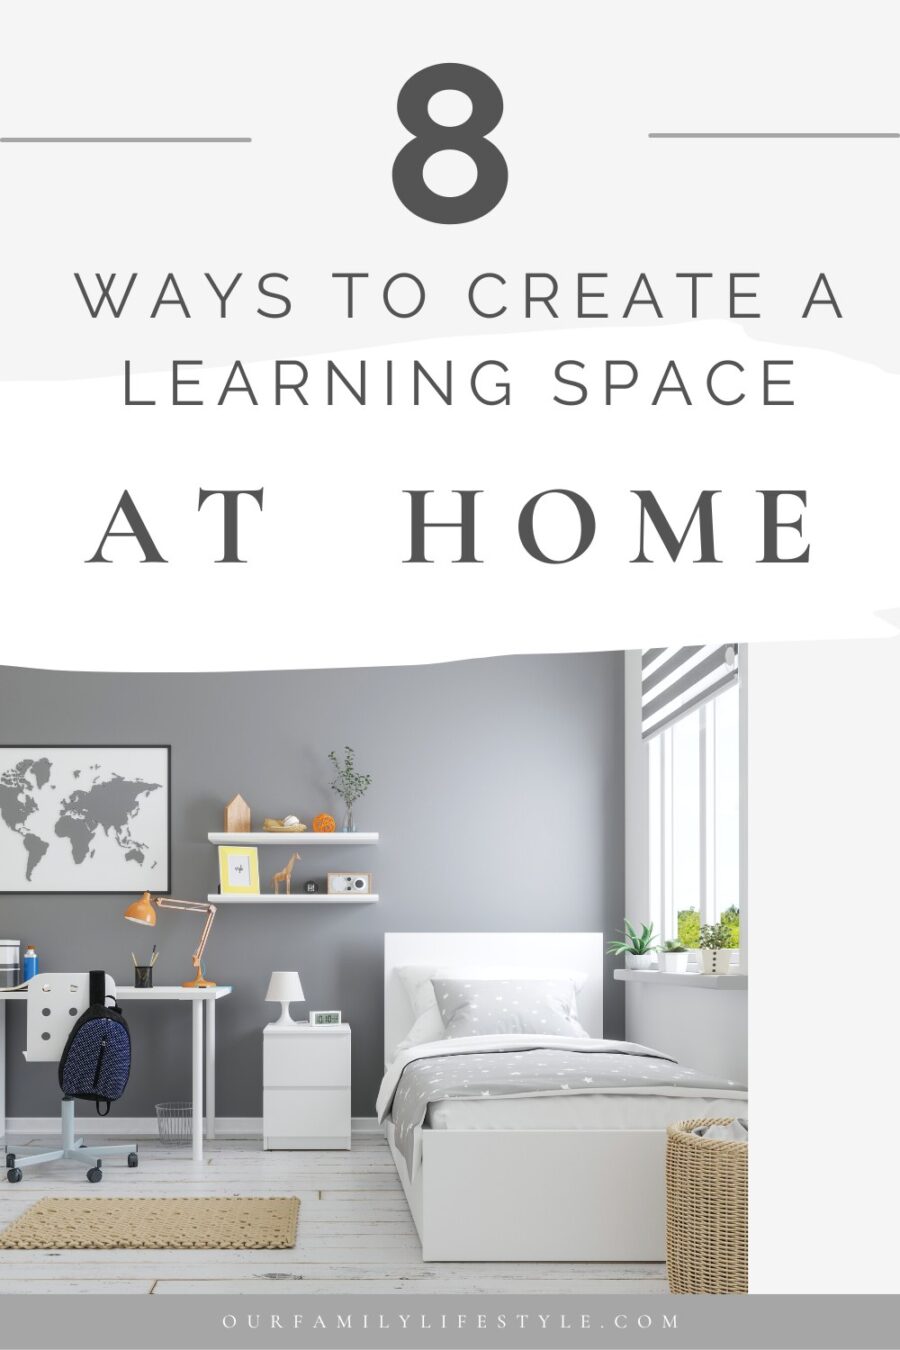 How to Create a Learning Space at Home